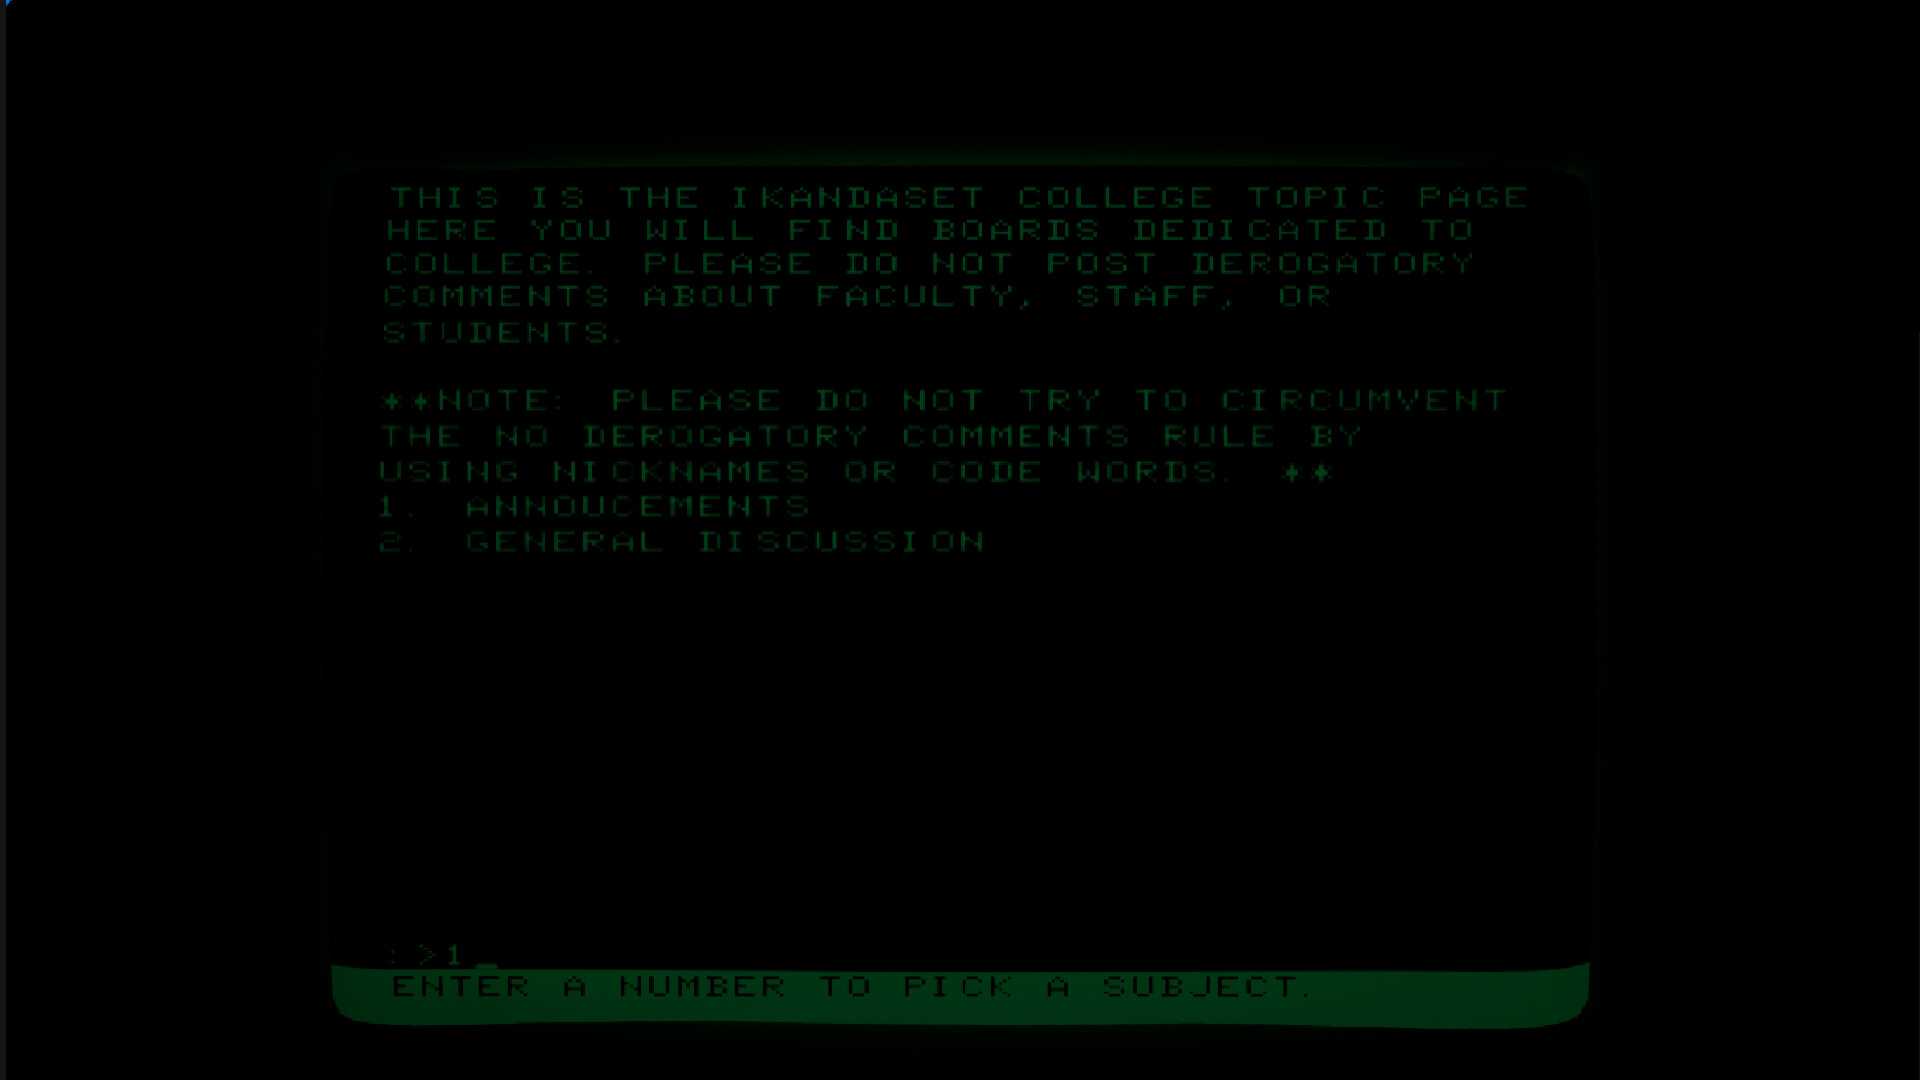 A retro computer screen showing the welcome page of the Ikandaset College BBS